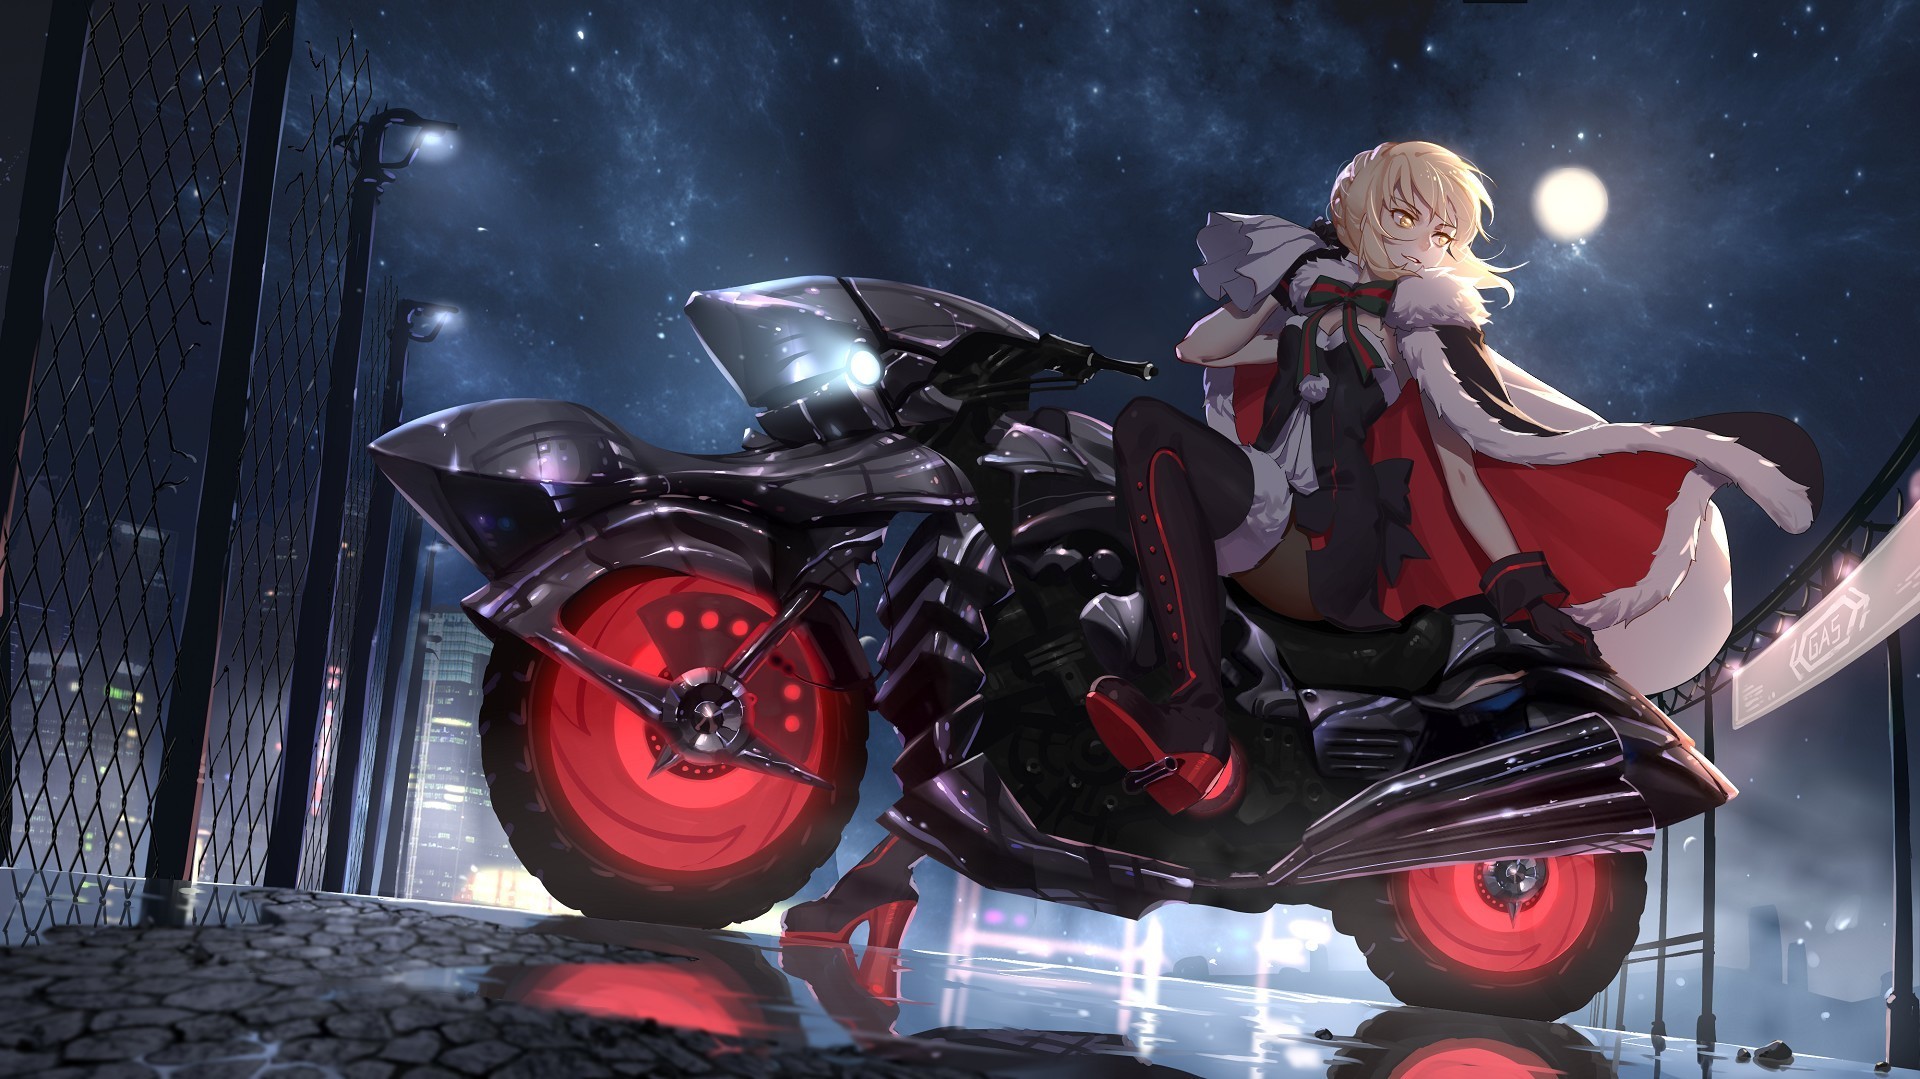 Wallpaper Woman in Black and Red Sports Bike Anime Character Background   Download Free Image